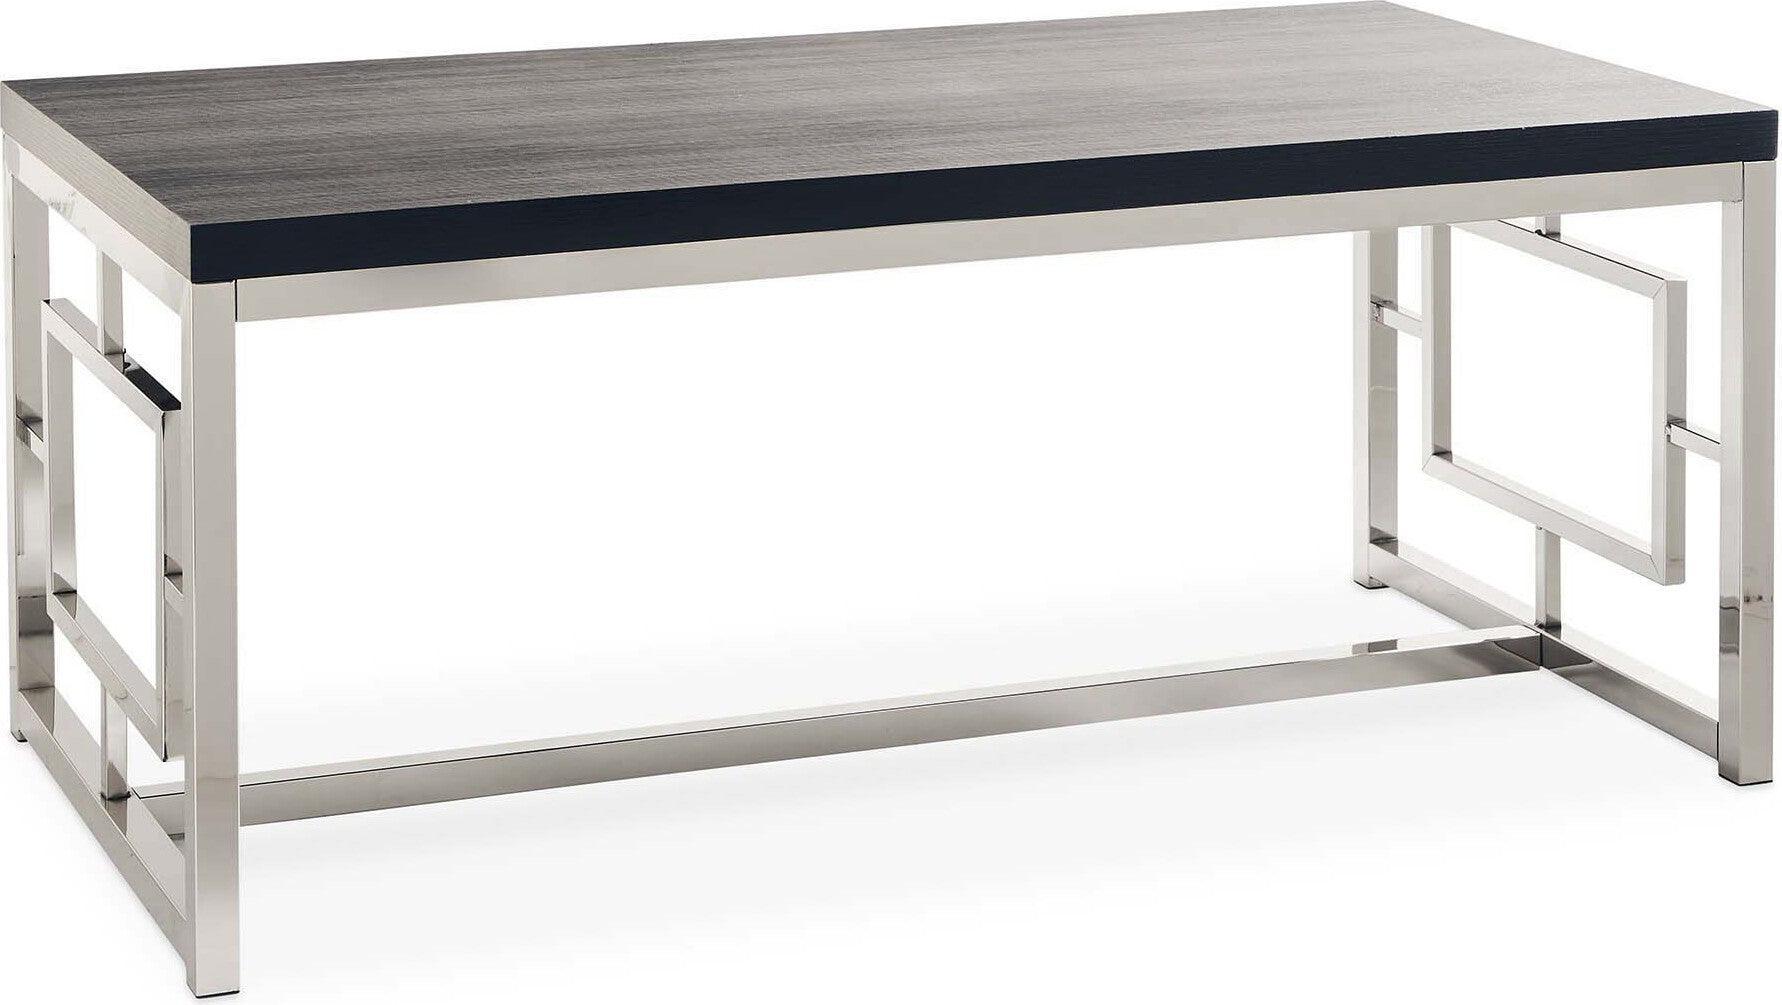 Elements Coffee Tables - Harper Coffee Table Chrome & Black